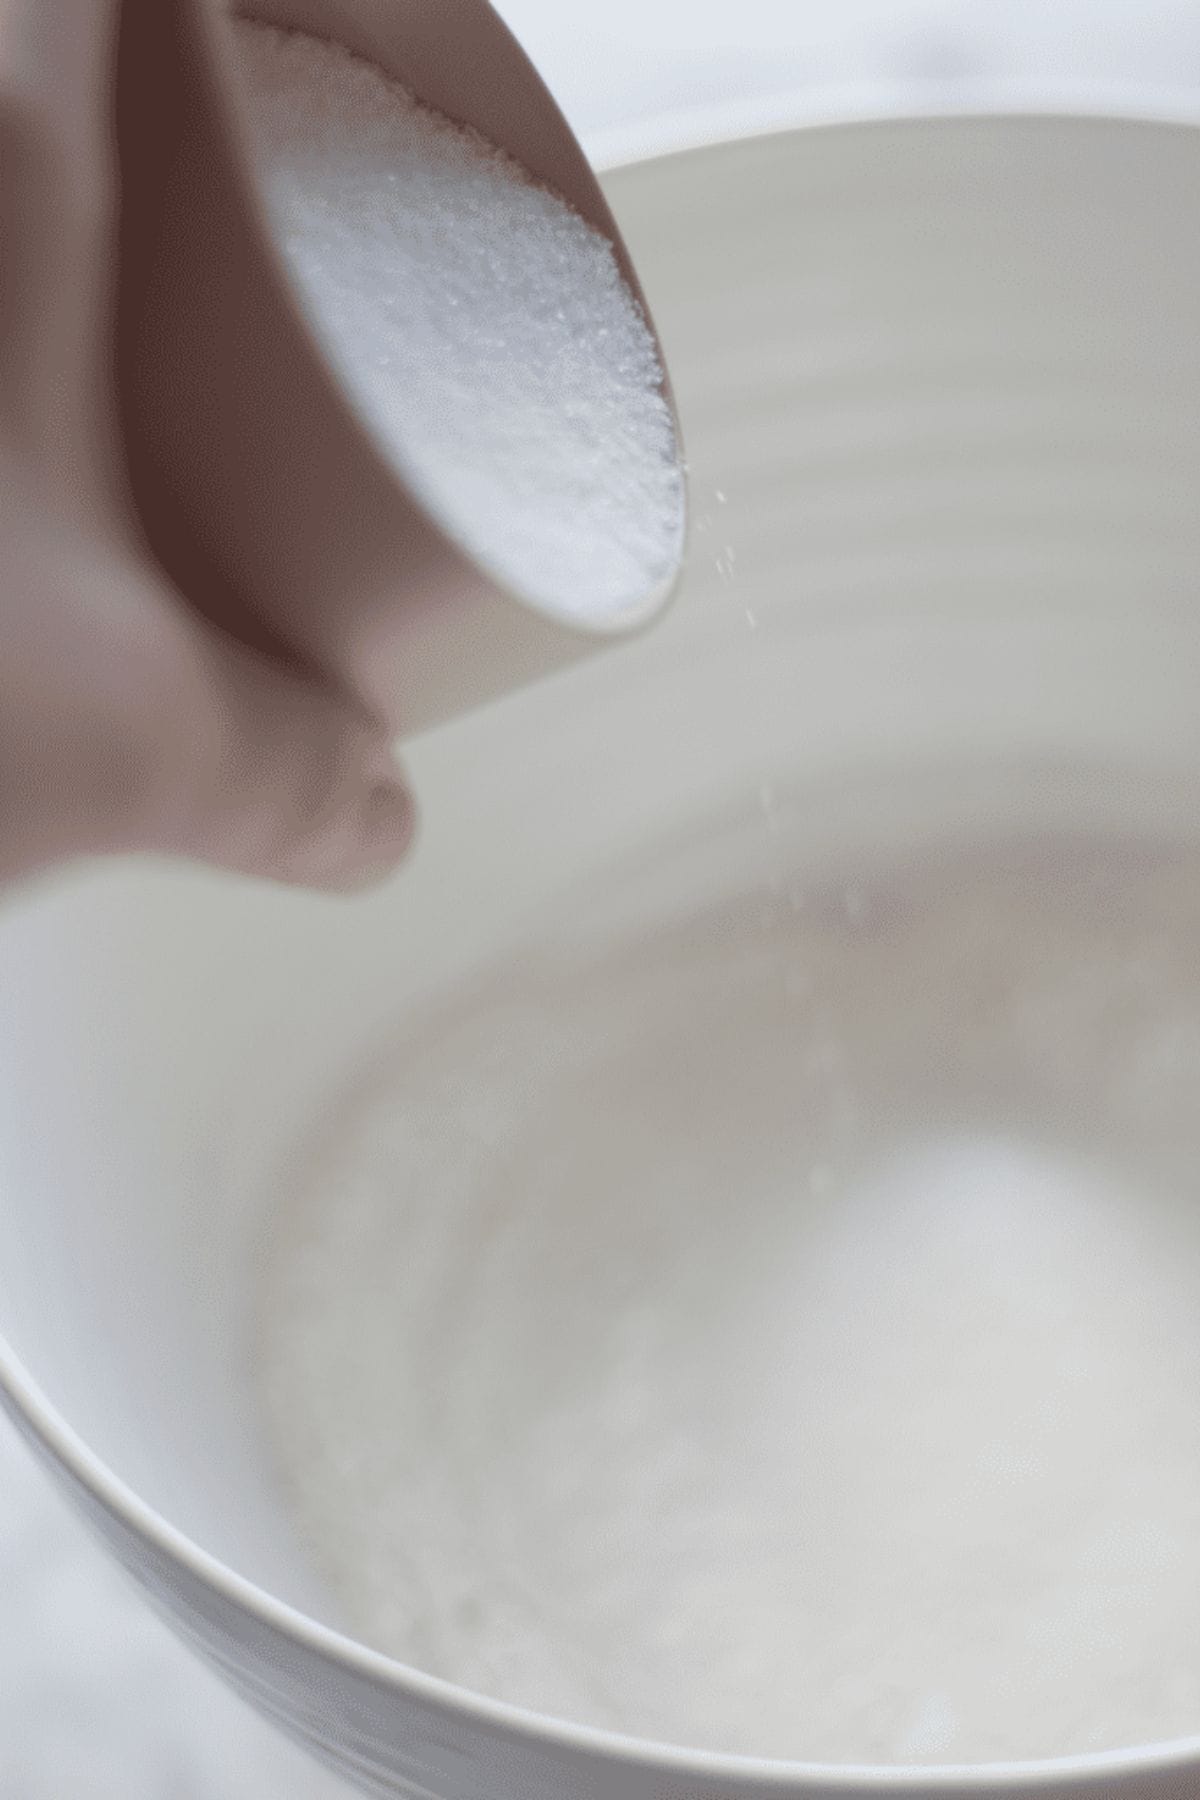 sugar being poured into the bowl